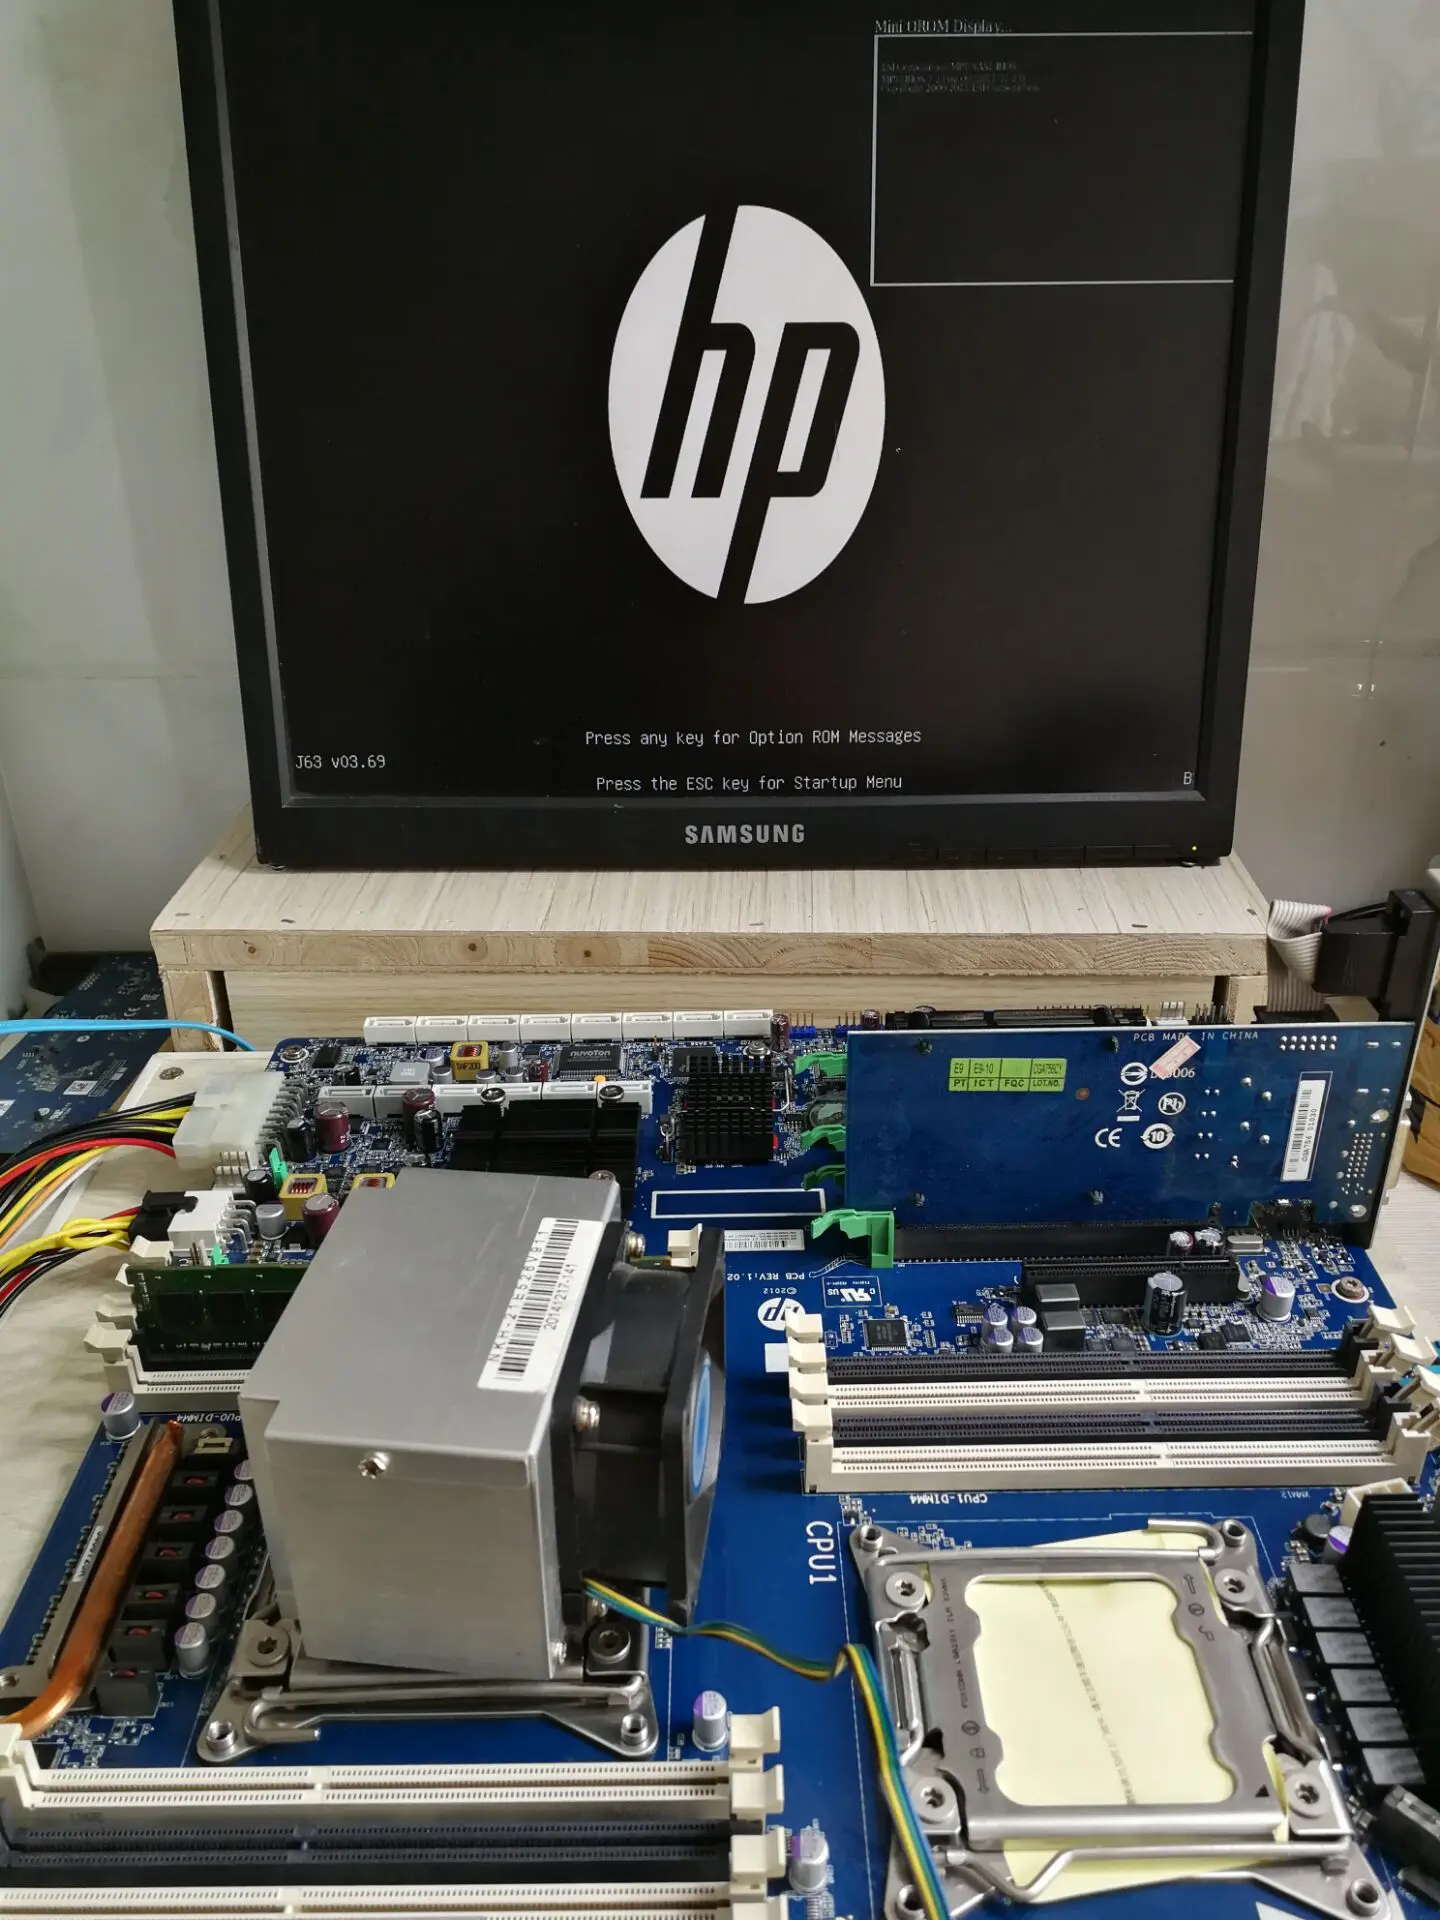 hewlett packard 158b - What is the maximum RAM for the Z820